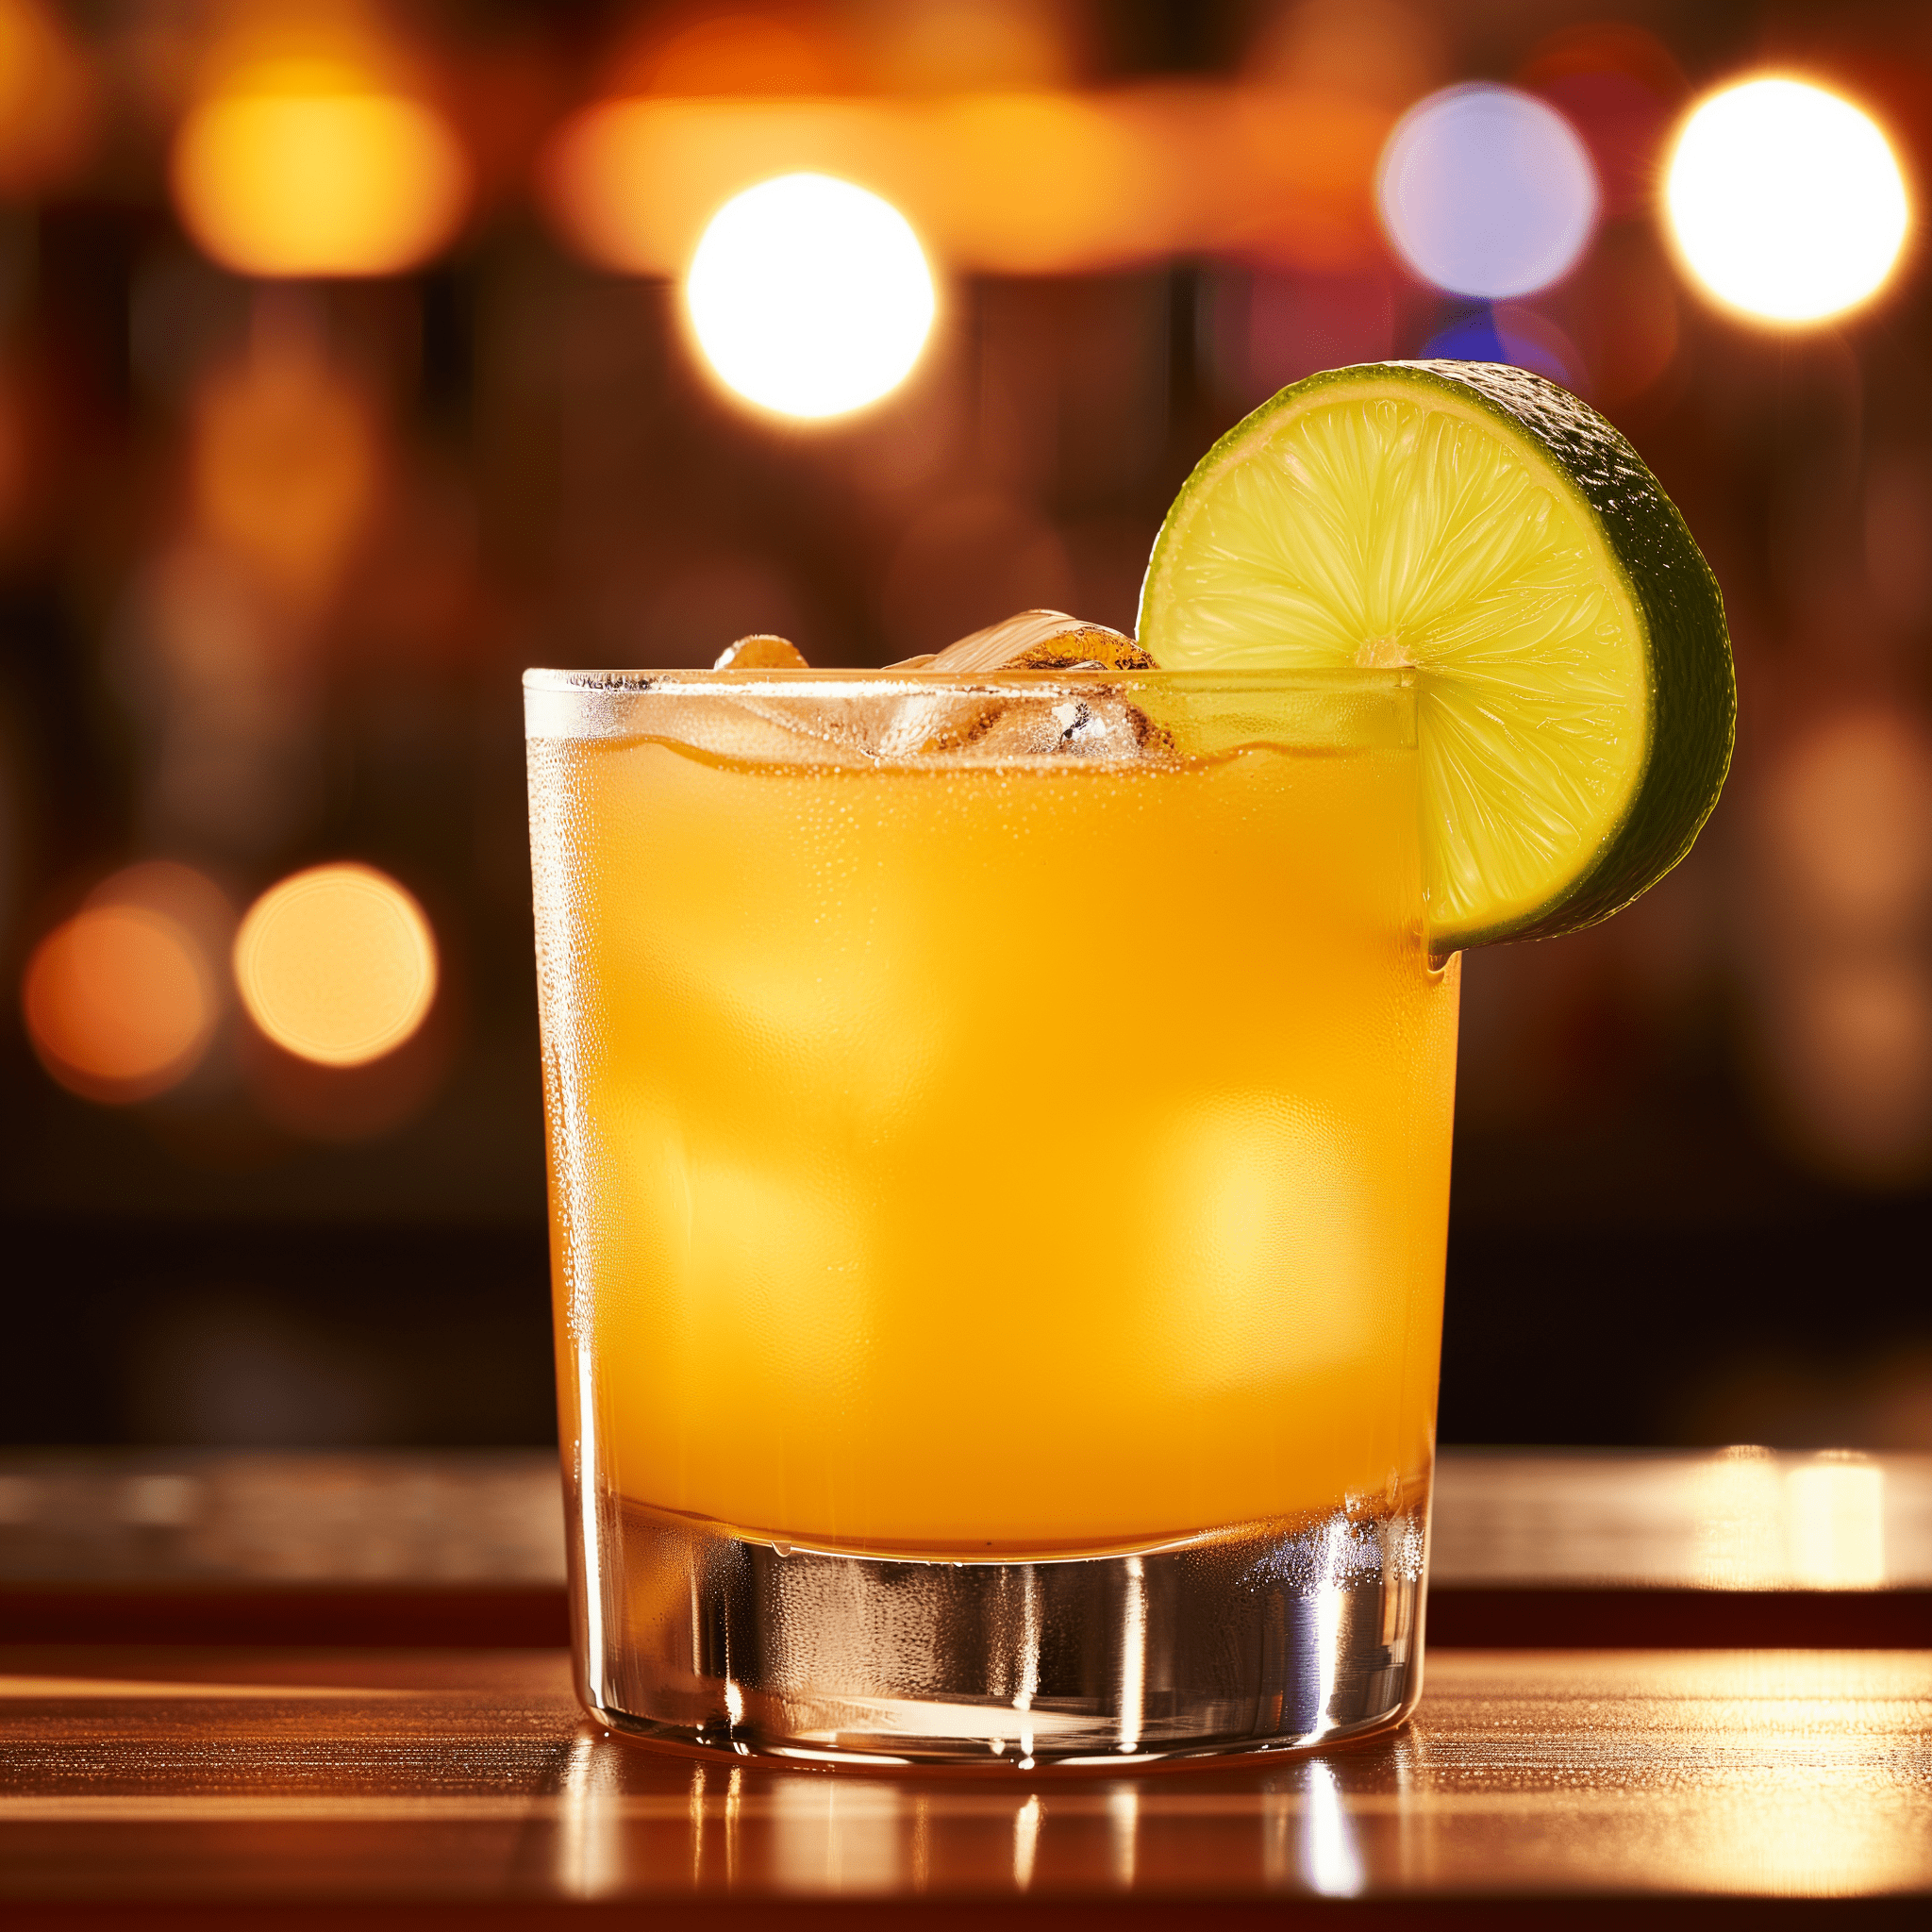 The Gold Driver offers a smooth, yet robust taste with a perfect blend of sweet and tangy. The tequila provides a warm, oaky undertone, while the fresh lime juice adds a zesty, slightly tart edge. The orange juice brings it all together with its natural sweetness and fruity notes, making for a refreshing and invigorating drink.